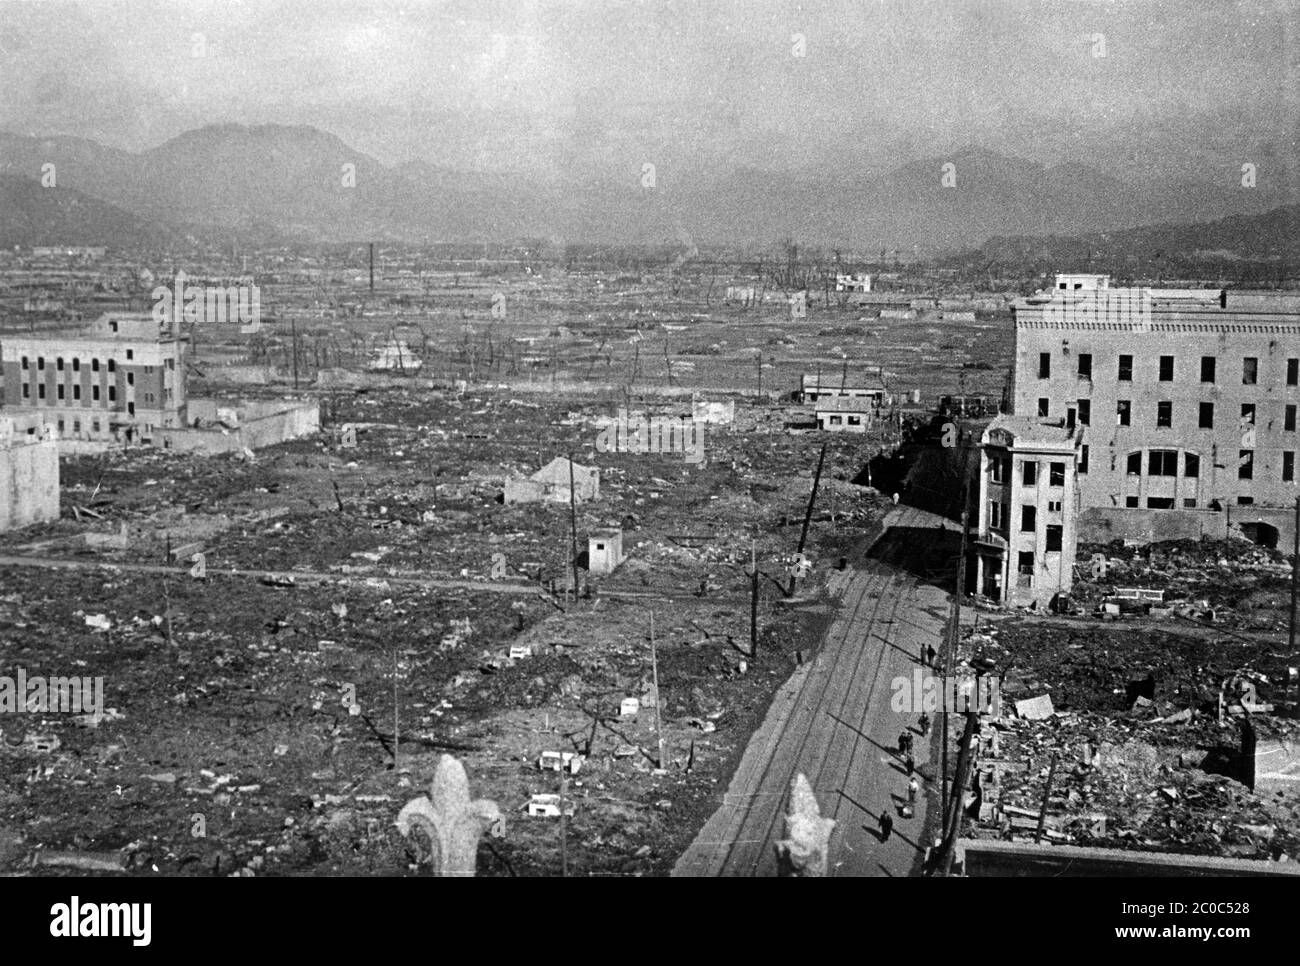 [ 1945 Japan - Atomic Bombing of Hiroshima ] — US military archival photo of the aftermath of the atomic bombing of Hiroshima, ca. 1945 (Showa 20).  Warning: clear, but slightly out of focus.  20th century vintage gelatin silver print. Stock Photo